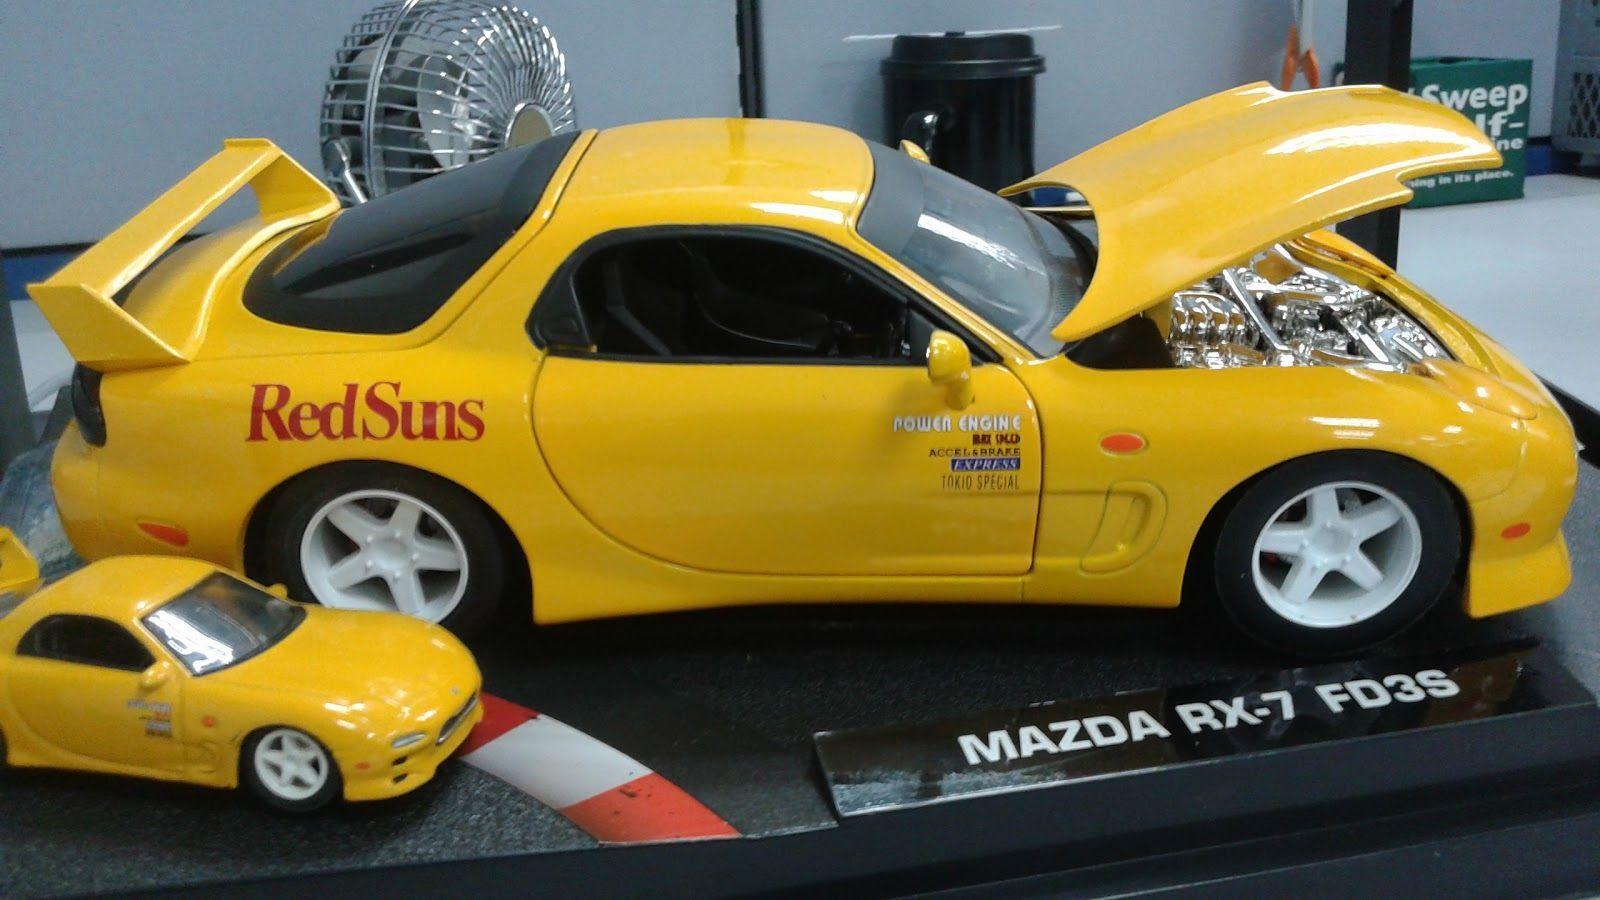 Red Suns Initial D Logo - Mazda RX-7 Red Suns | Initial D | Pinterest | Mazda, Initial d and Cars